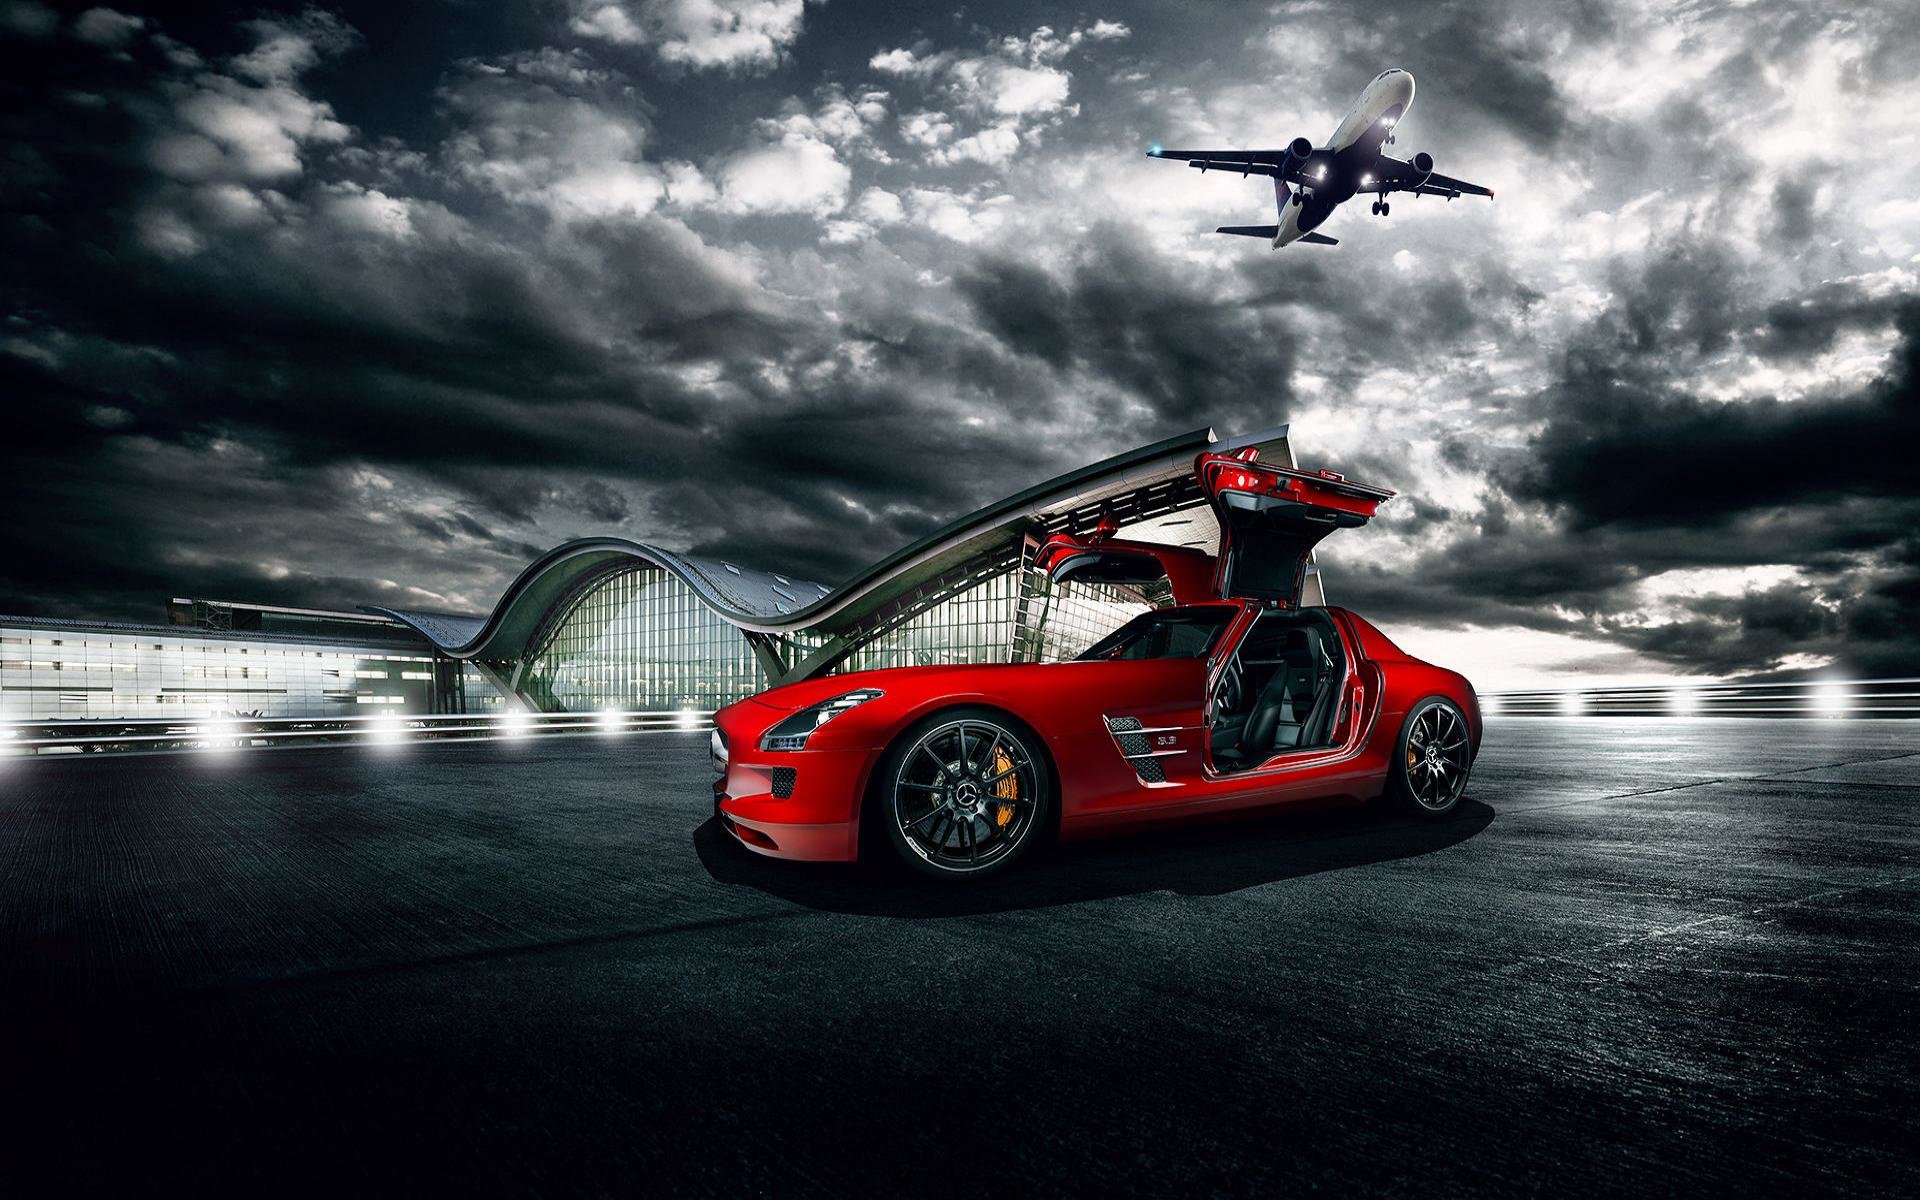 Awesome Mercedes Benz Sls Amg Wallpaper Download